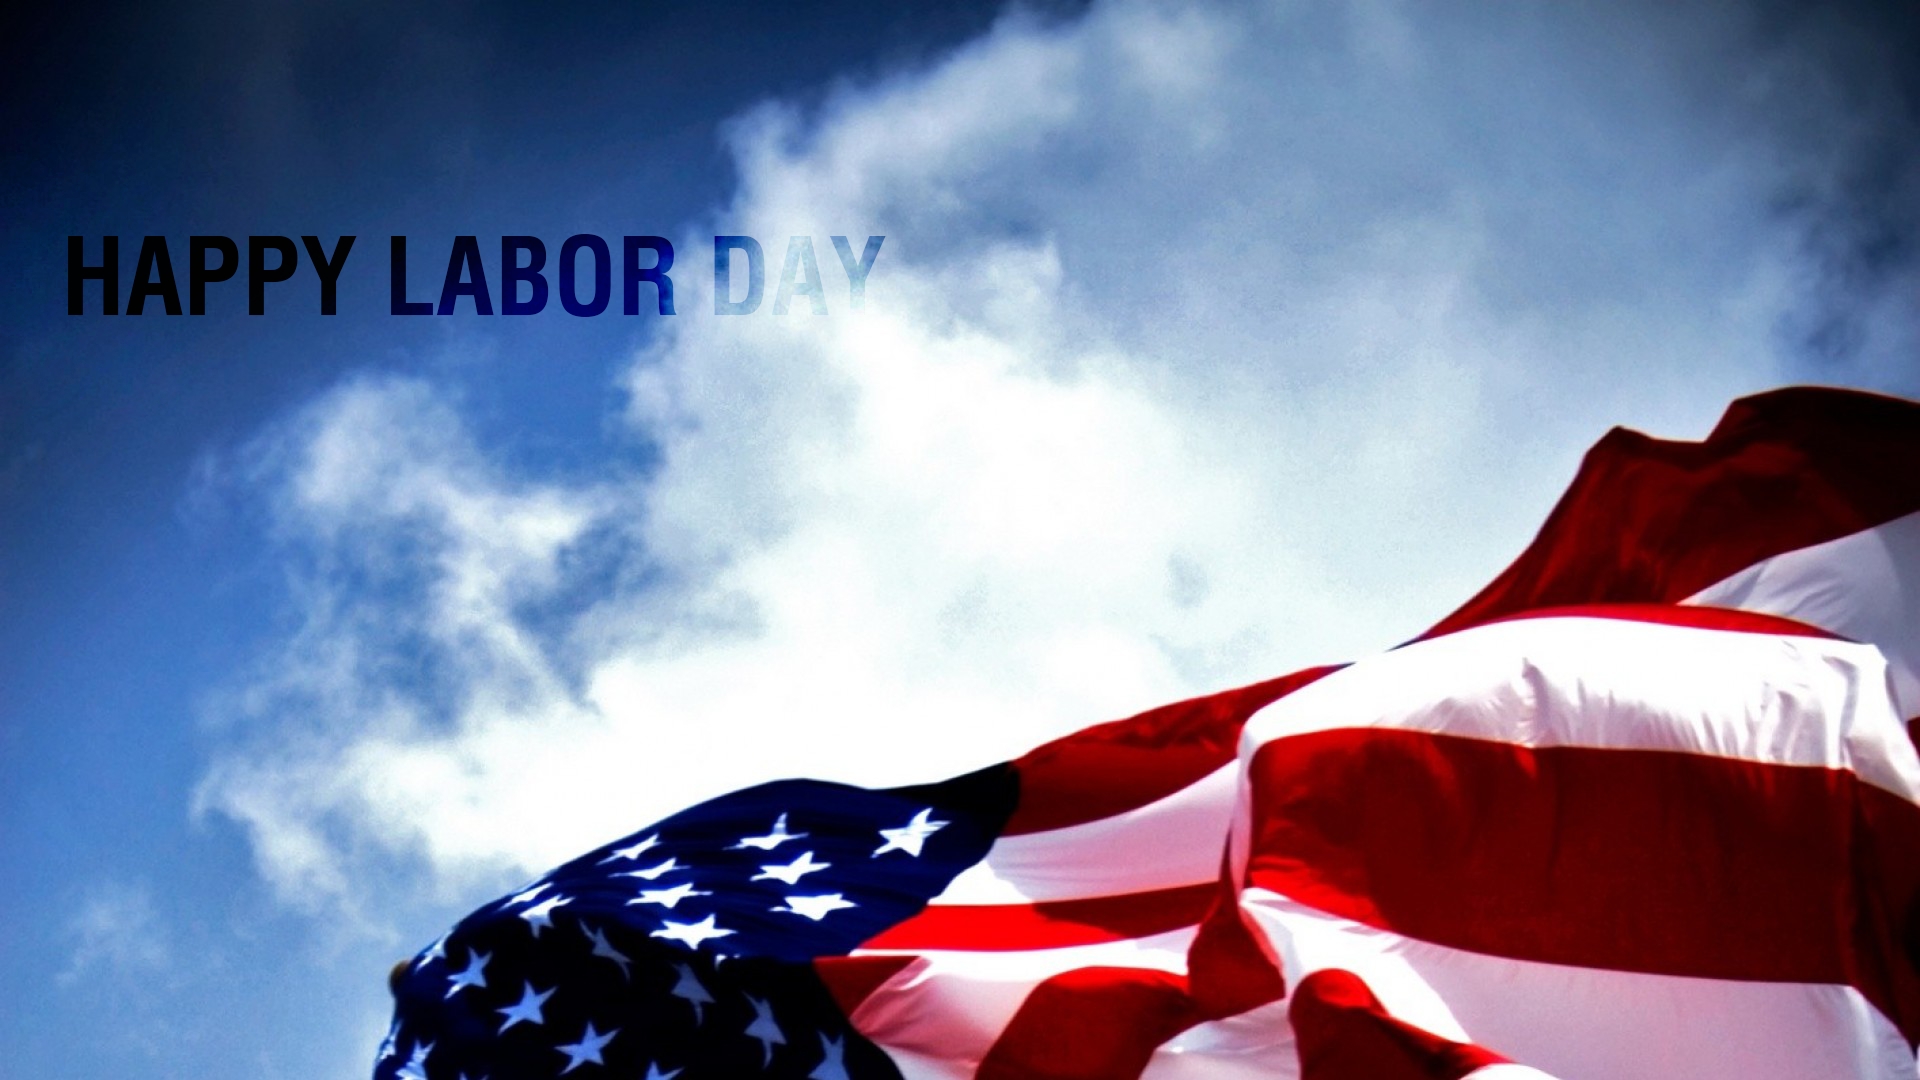 impressive 2016 wallpapers pack: labor day wallpapers, p.129